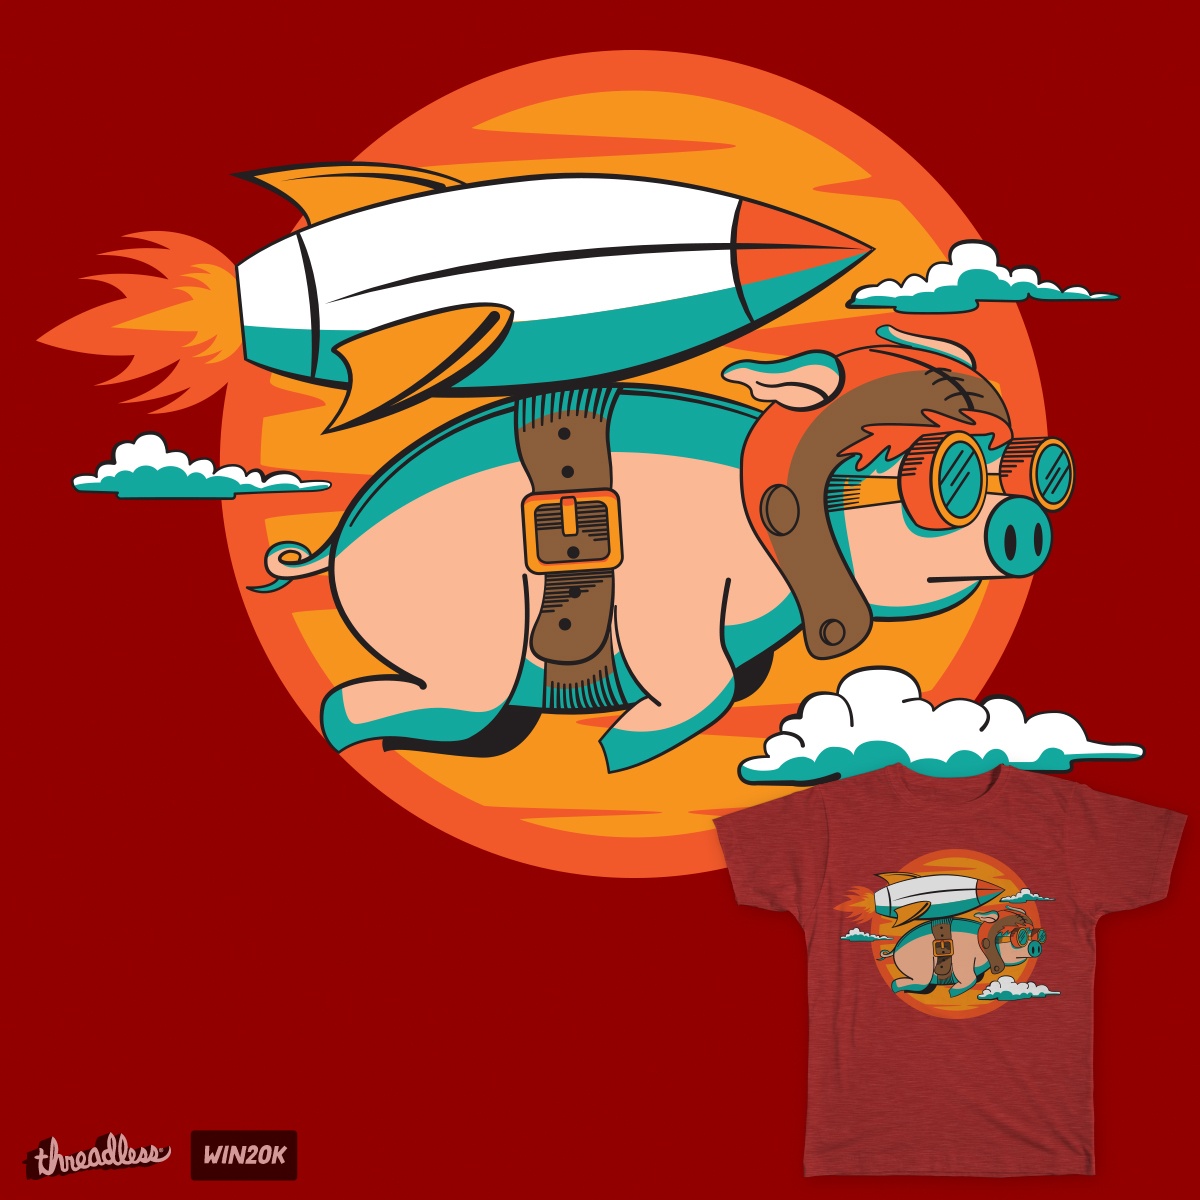 When pigs fly, a cool t-shirt design